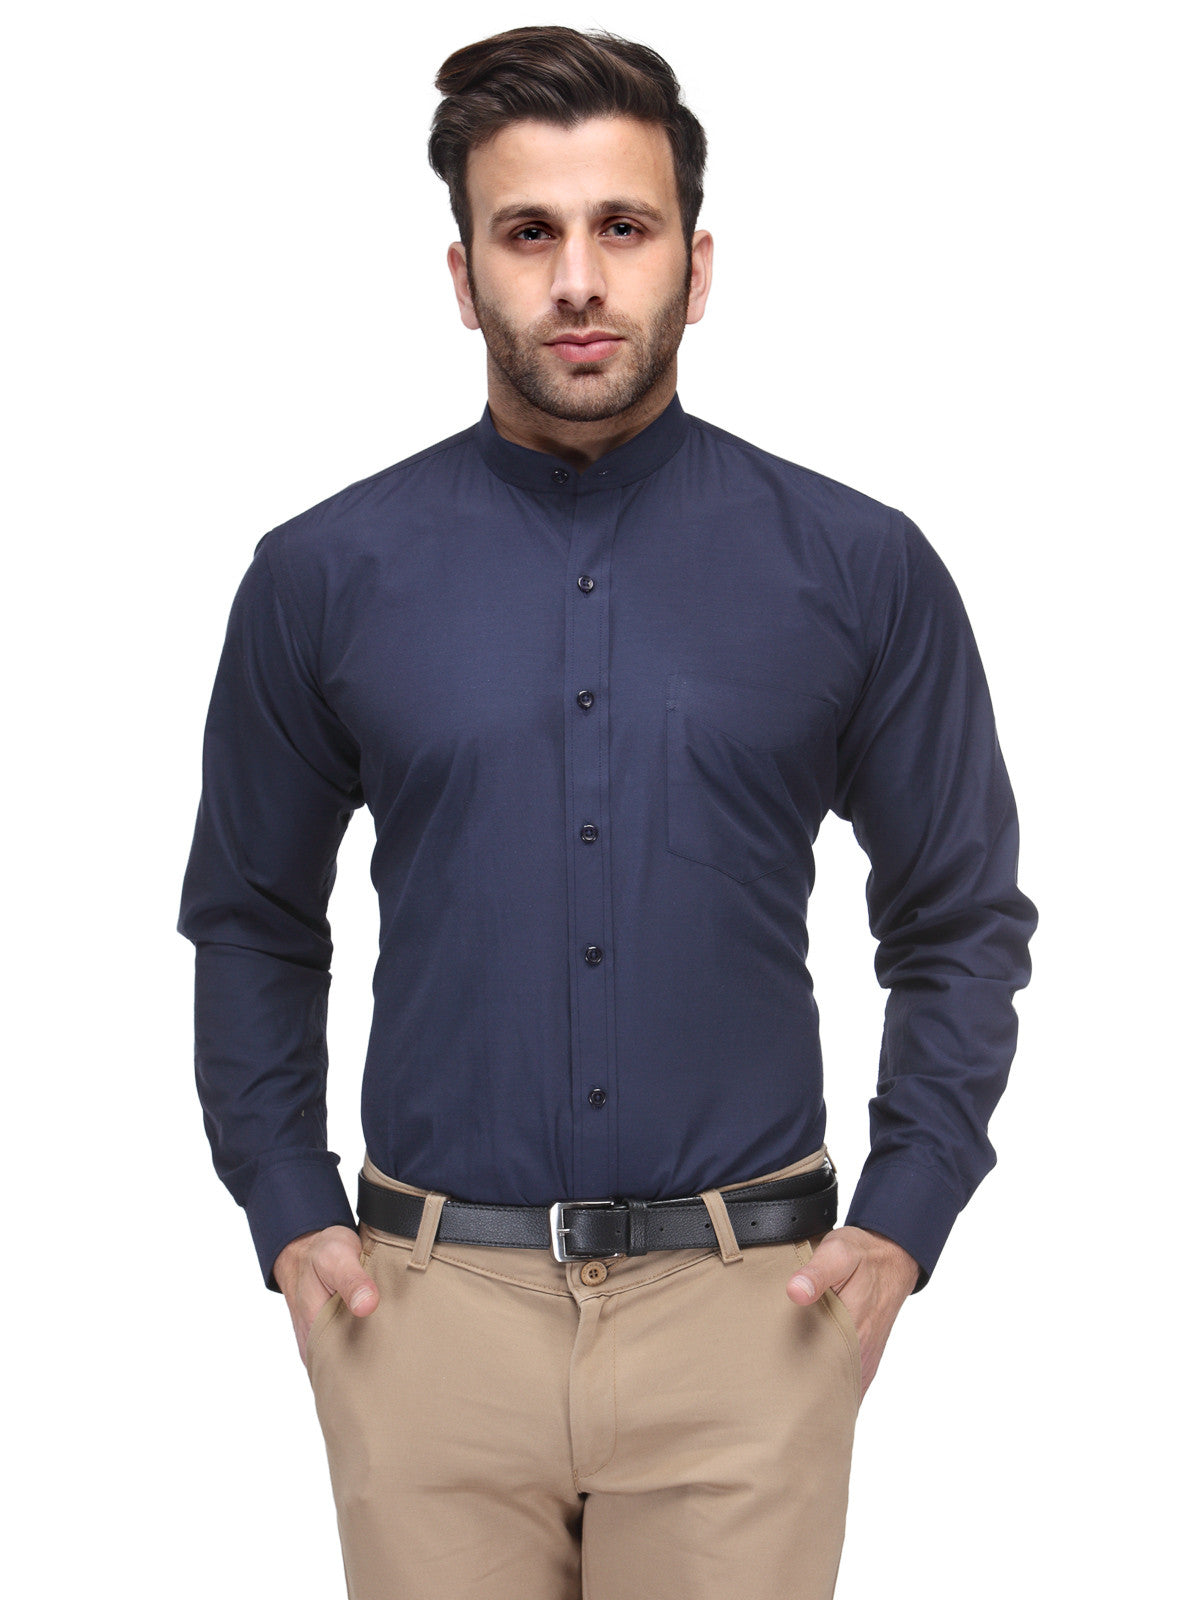 Buy Beauty Centre Security Guard Uniform Set (Blue Shirt And Black Pant)  (36) at Amazon.in